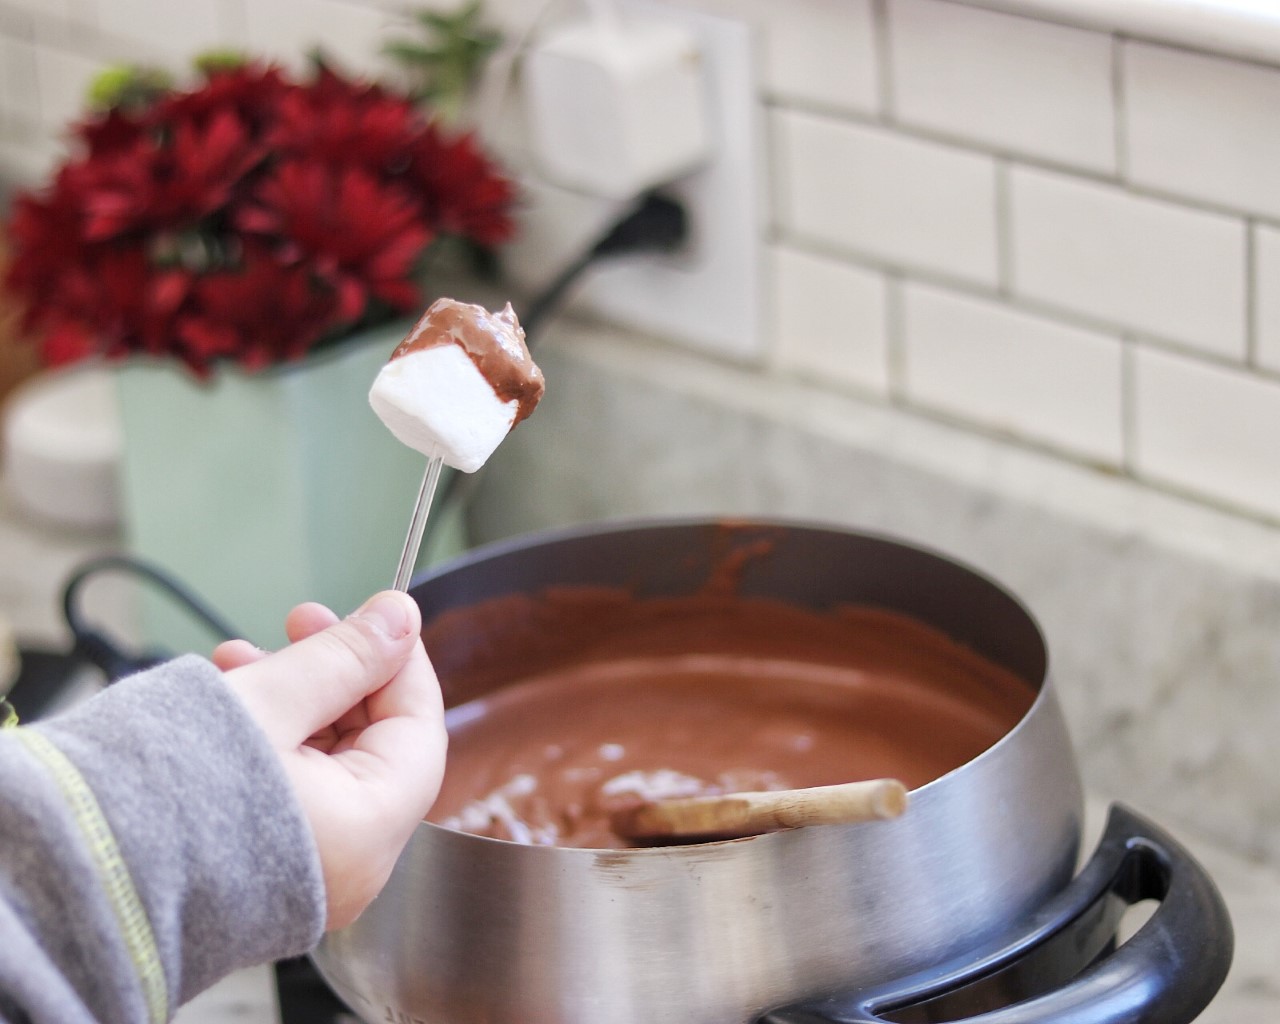 Food ideas for a Bendy and the Ink Machine themed birthday party: chocolate fondue bar